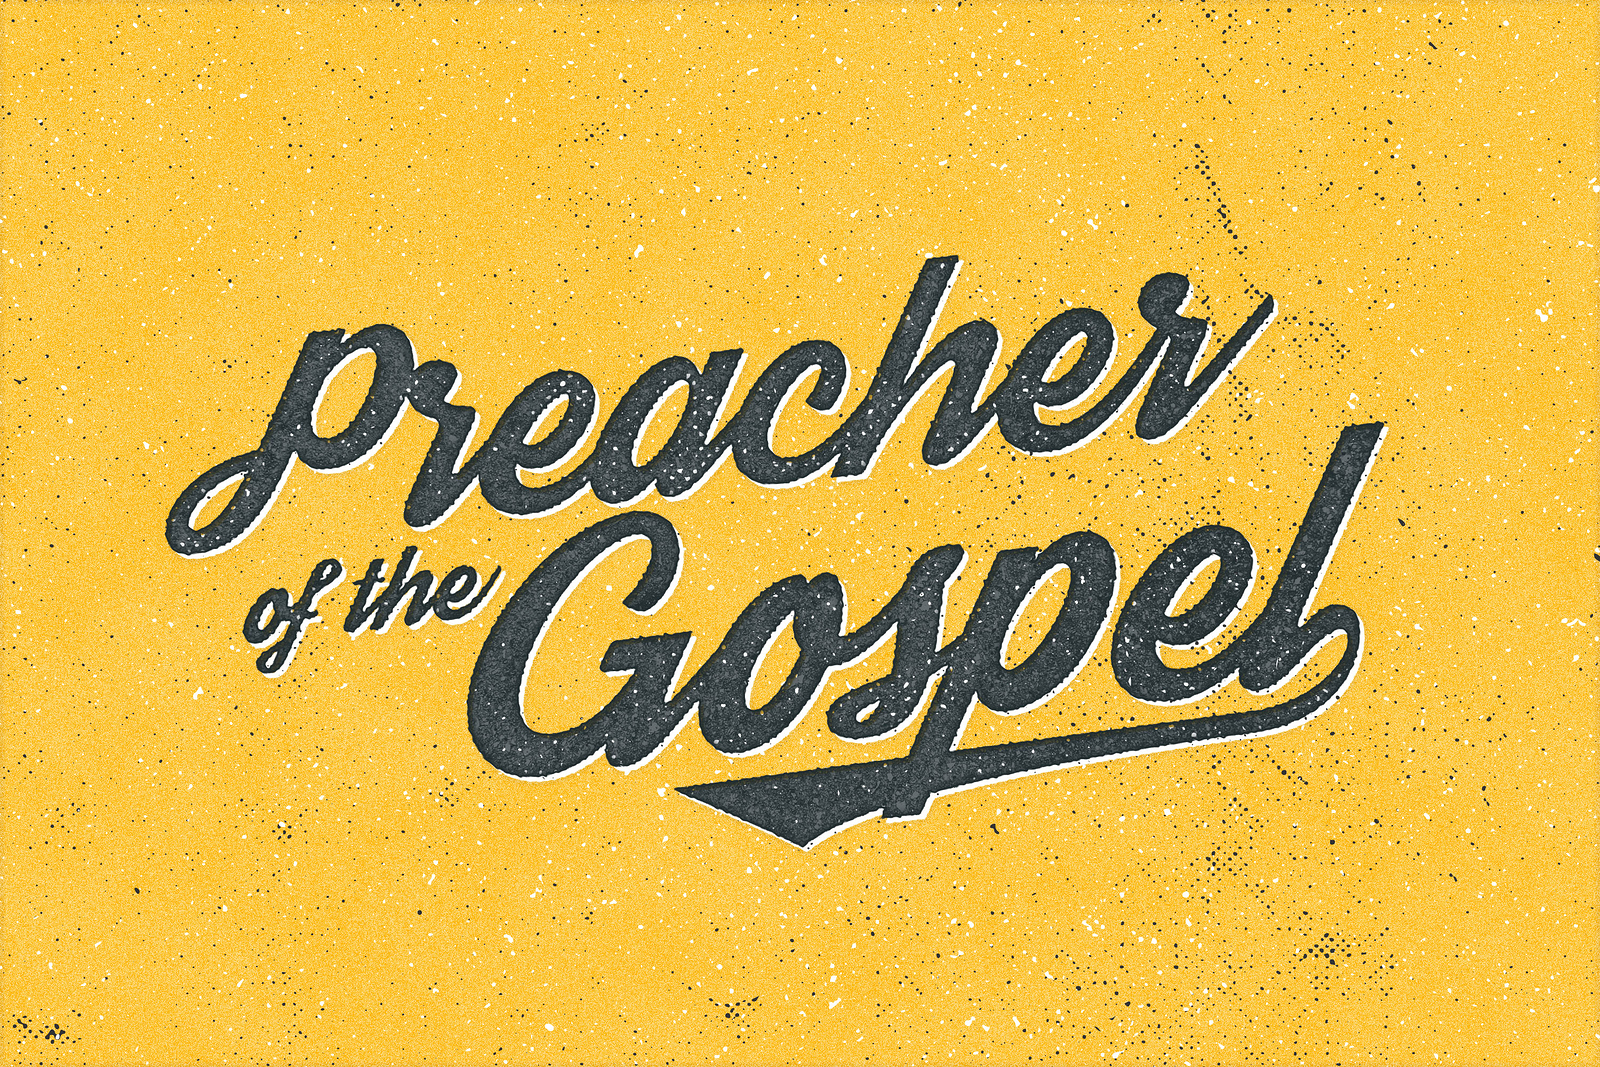 Pastor, Stop Preaching About the Gospel!